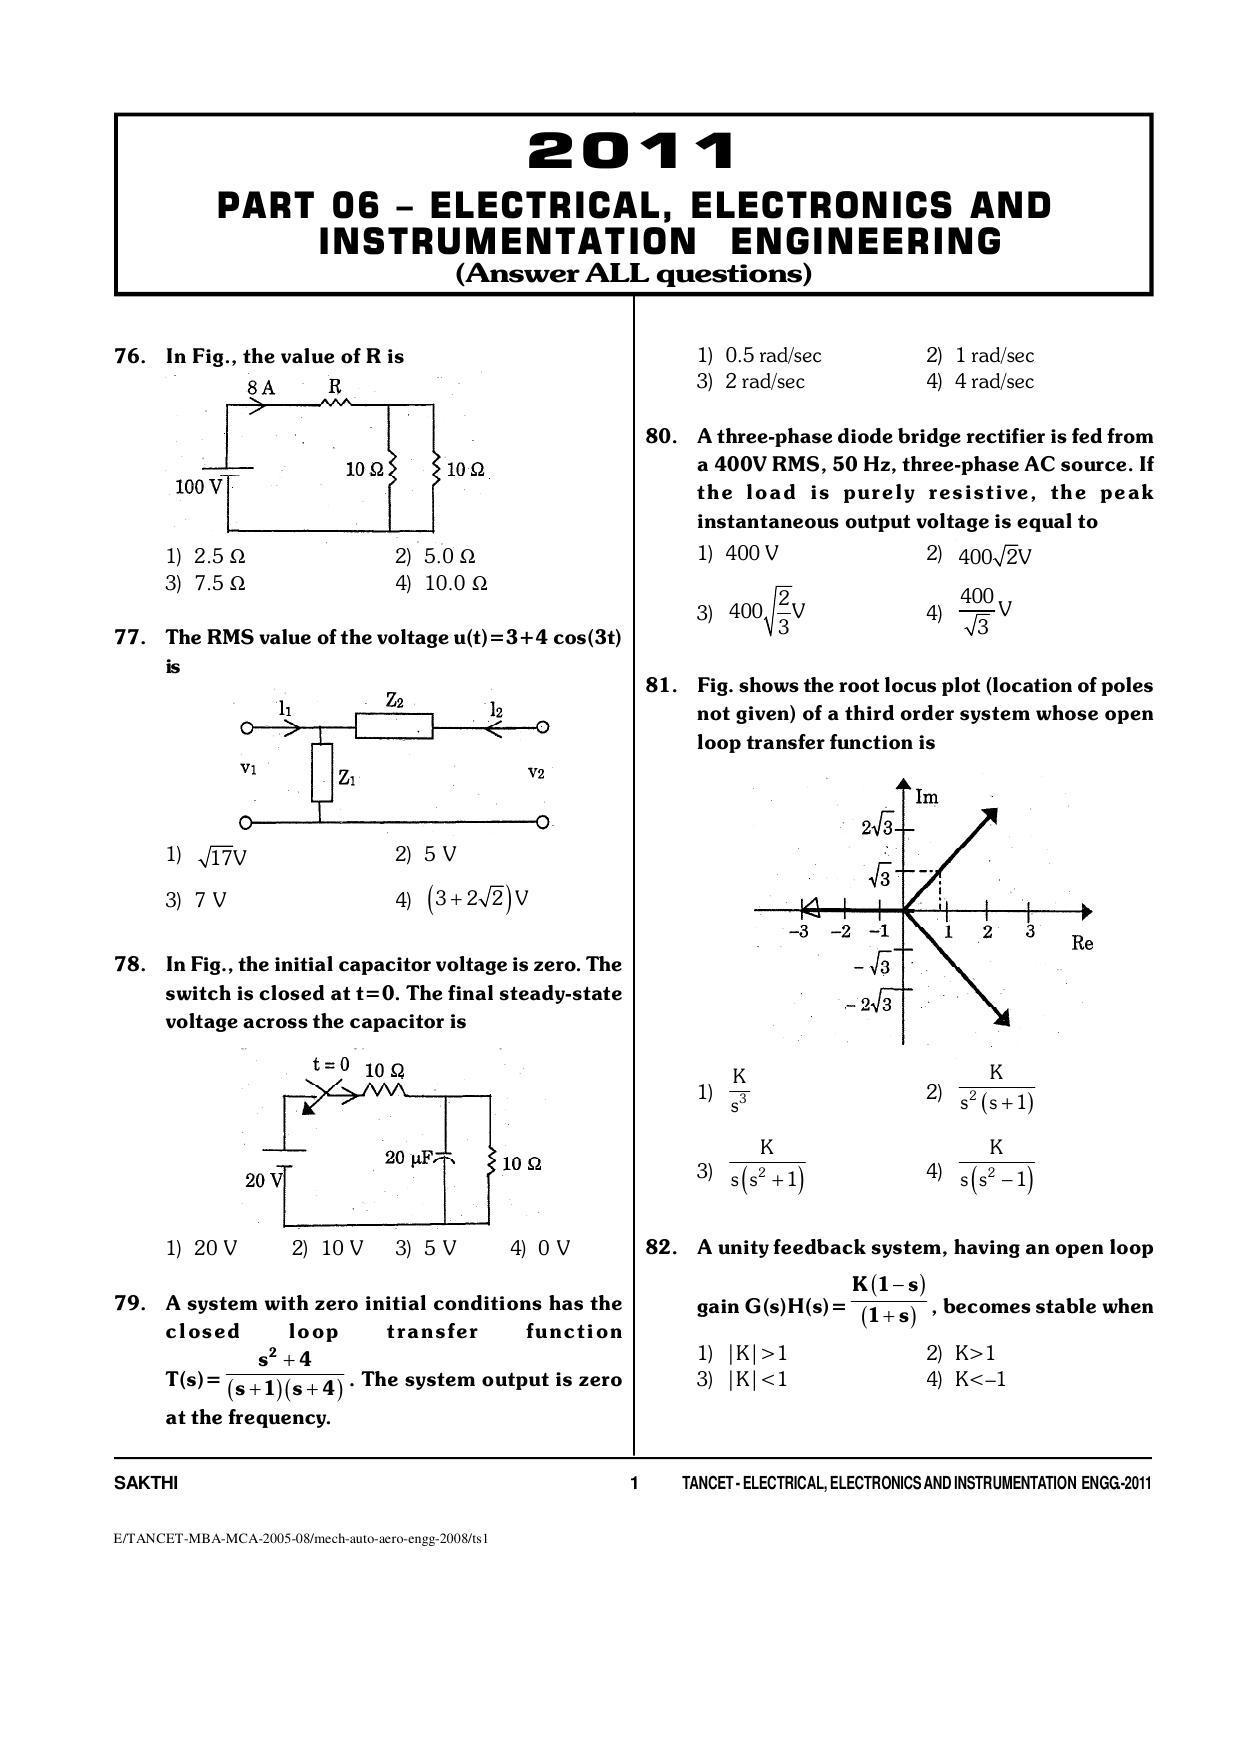 TANCET Electrical, Electronics and Instrumentation Engineering Question Papers 2011 - Page 1